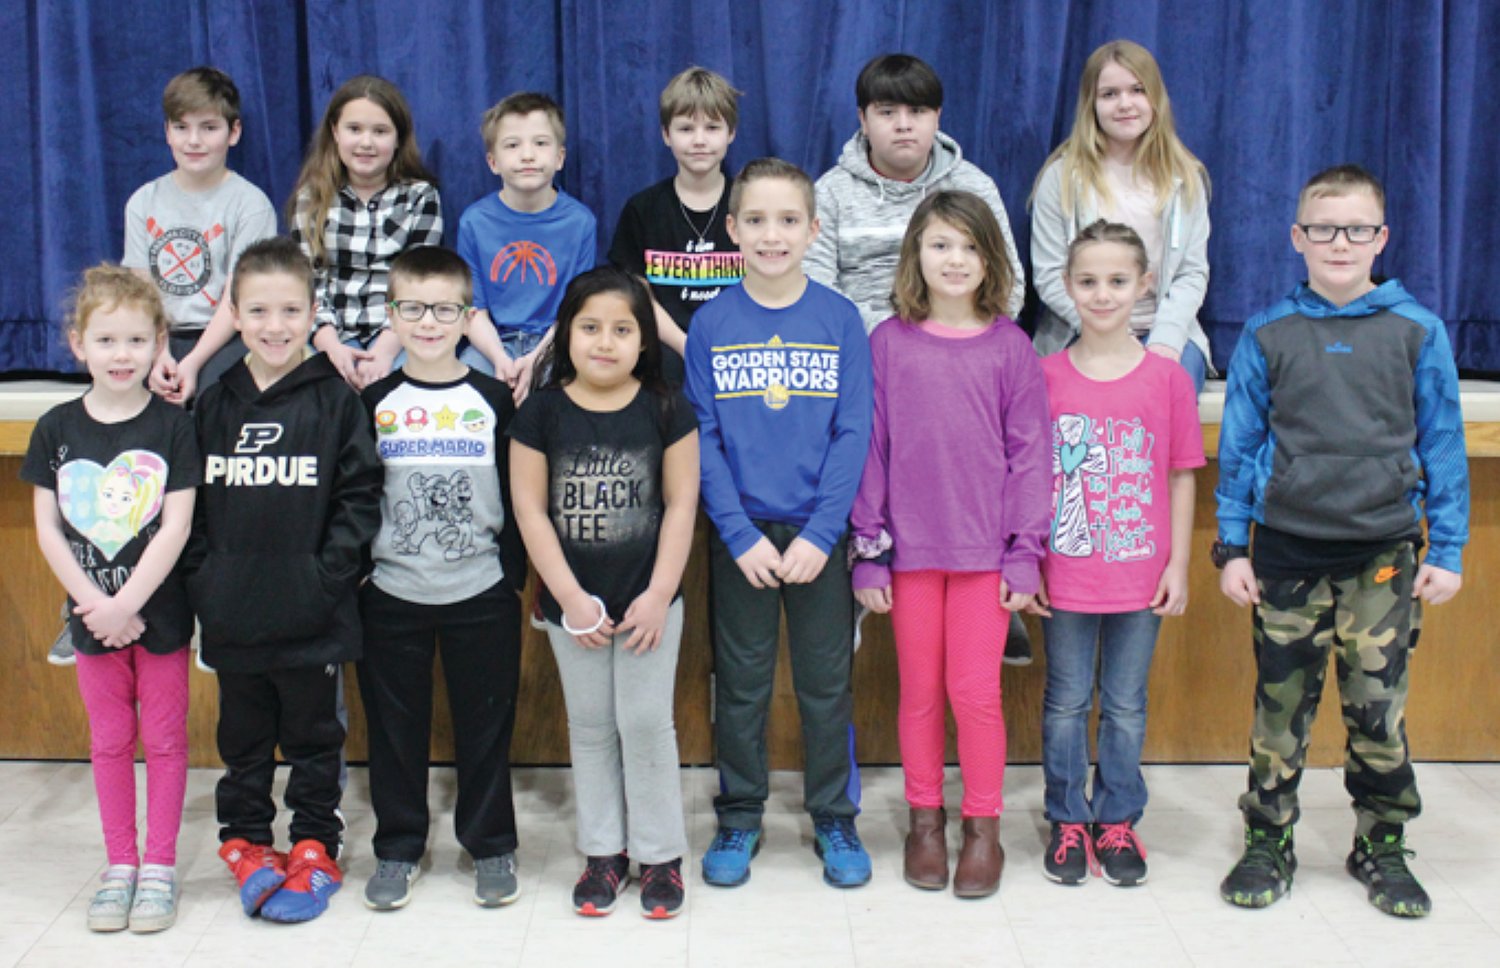 Southeast Fountain Elementary Students of the Month for December 2019 are, from left, Ava Ogle, Ty Ashwill, Douglas Webb, Dania Payes Jimenez, Drew Foxworthy, Kadence LaGue, Zoe Wildman and Austin Blankenship; and back row, Pepper Thompson, Annibella Mathews, Jeramiah Morris, Jolee Snelling, Angelo Viveros and Morgan Lewis.